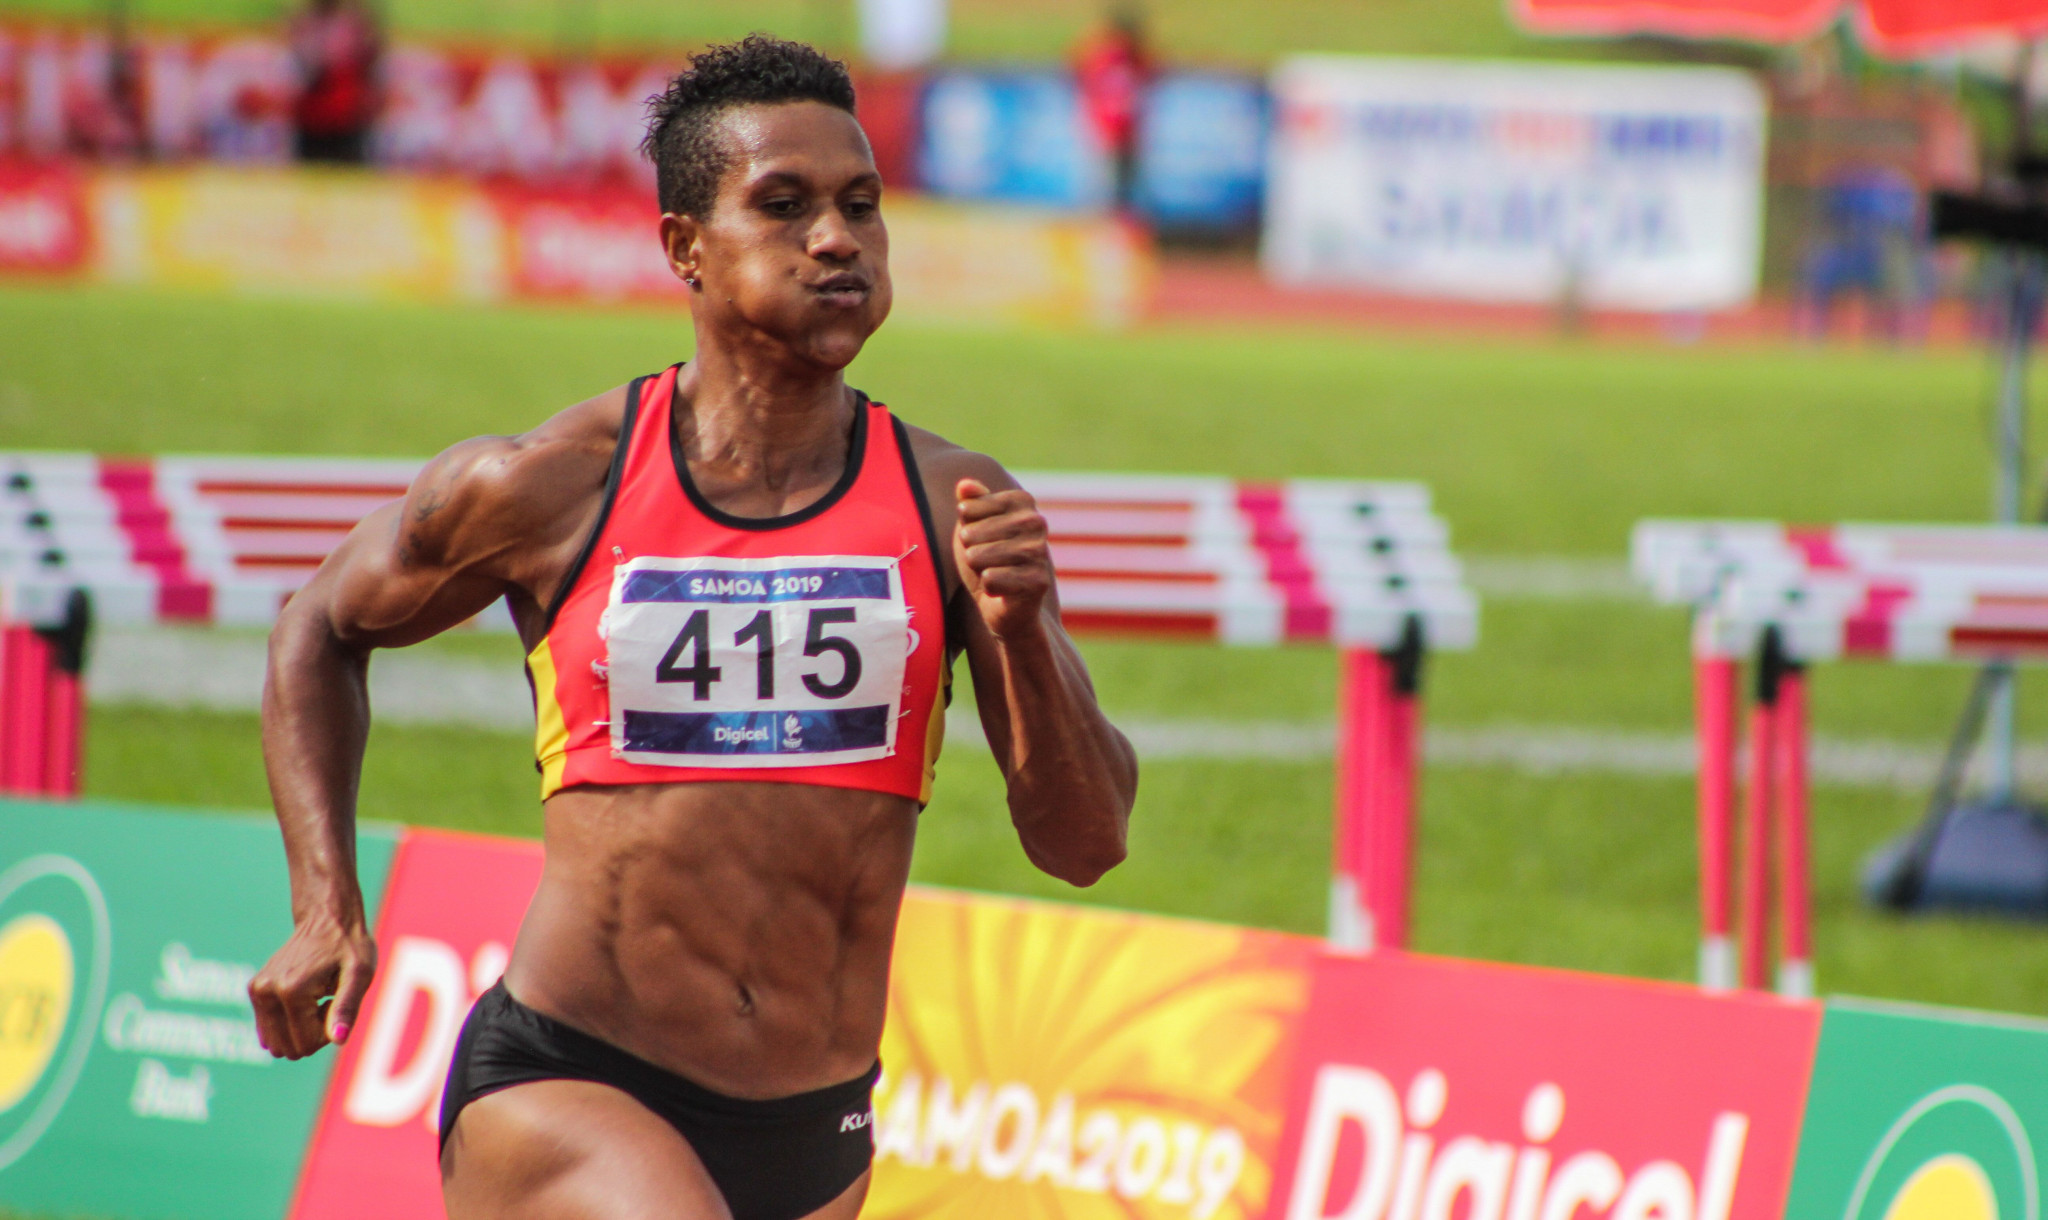 Wisil completes historic Pacific Games sprint triple-triple with 200m gold